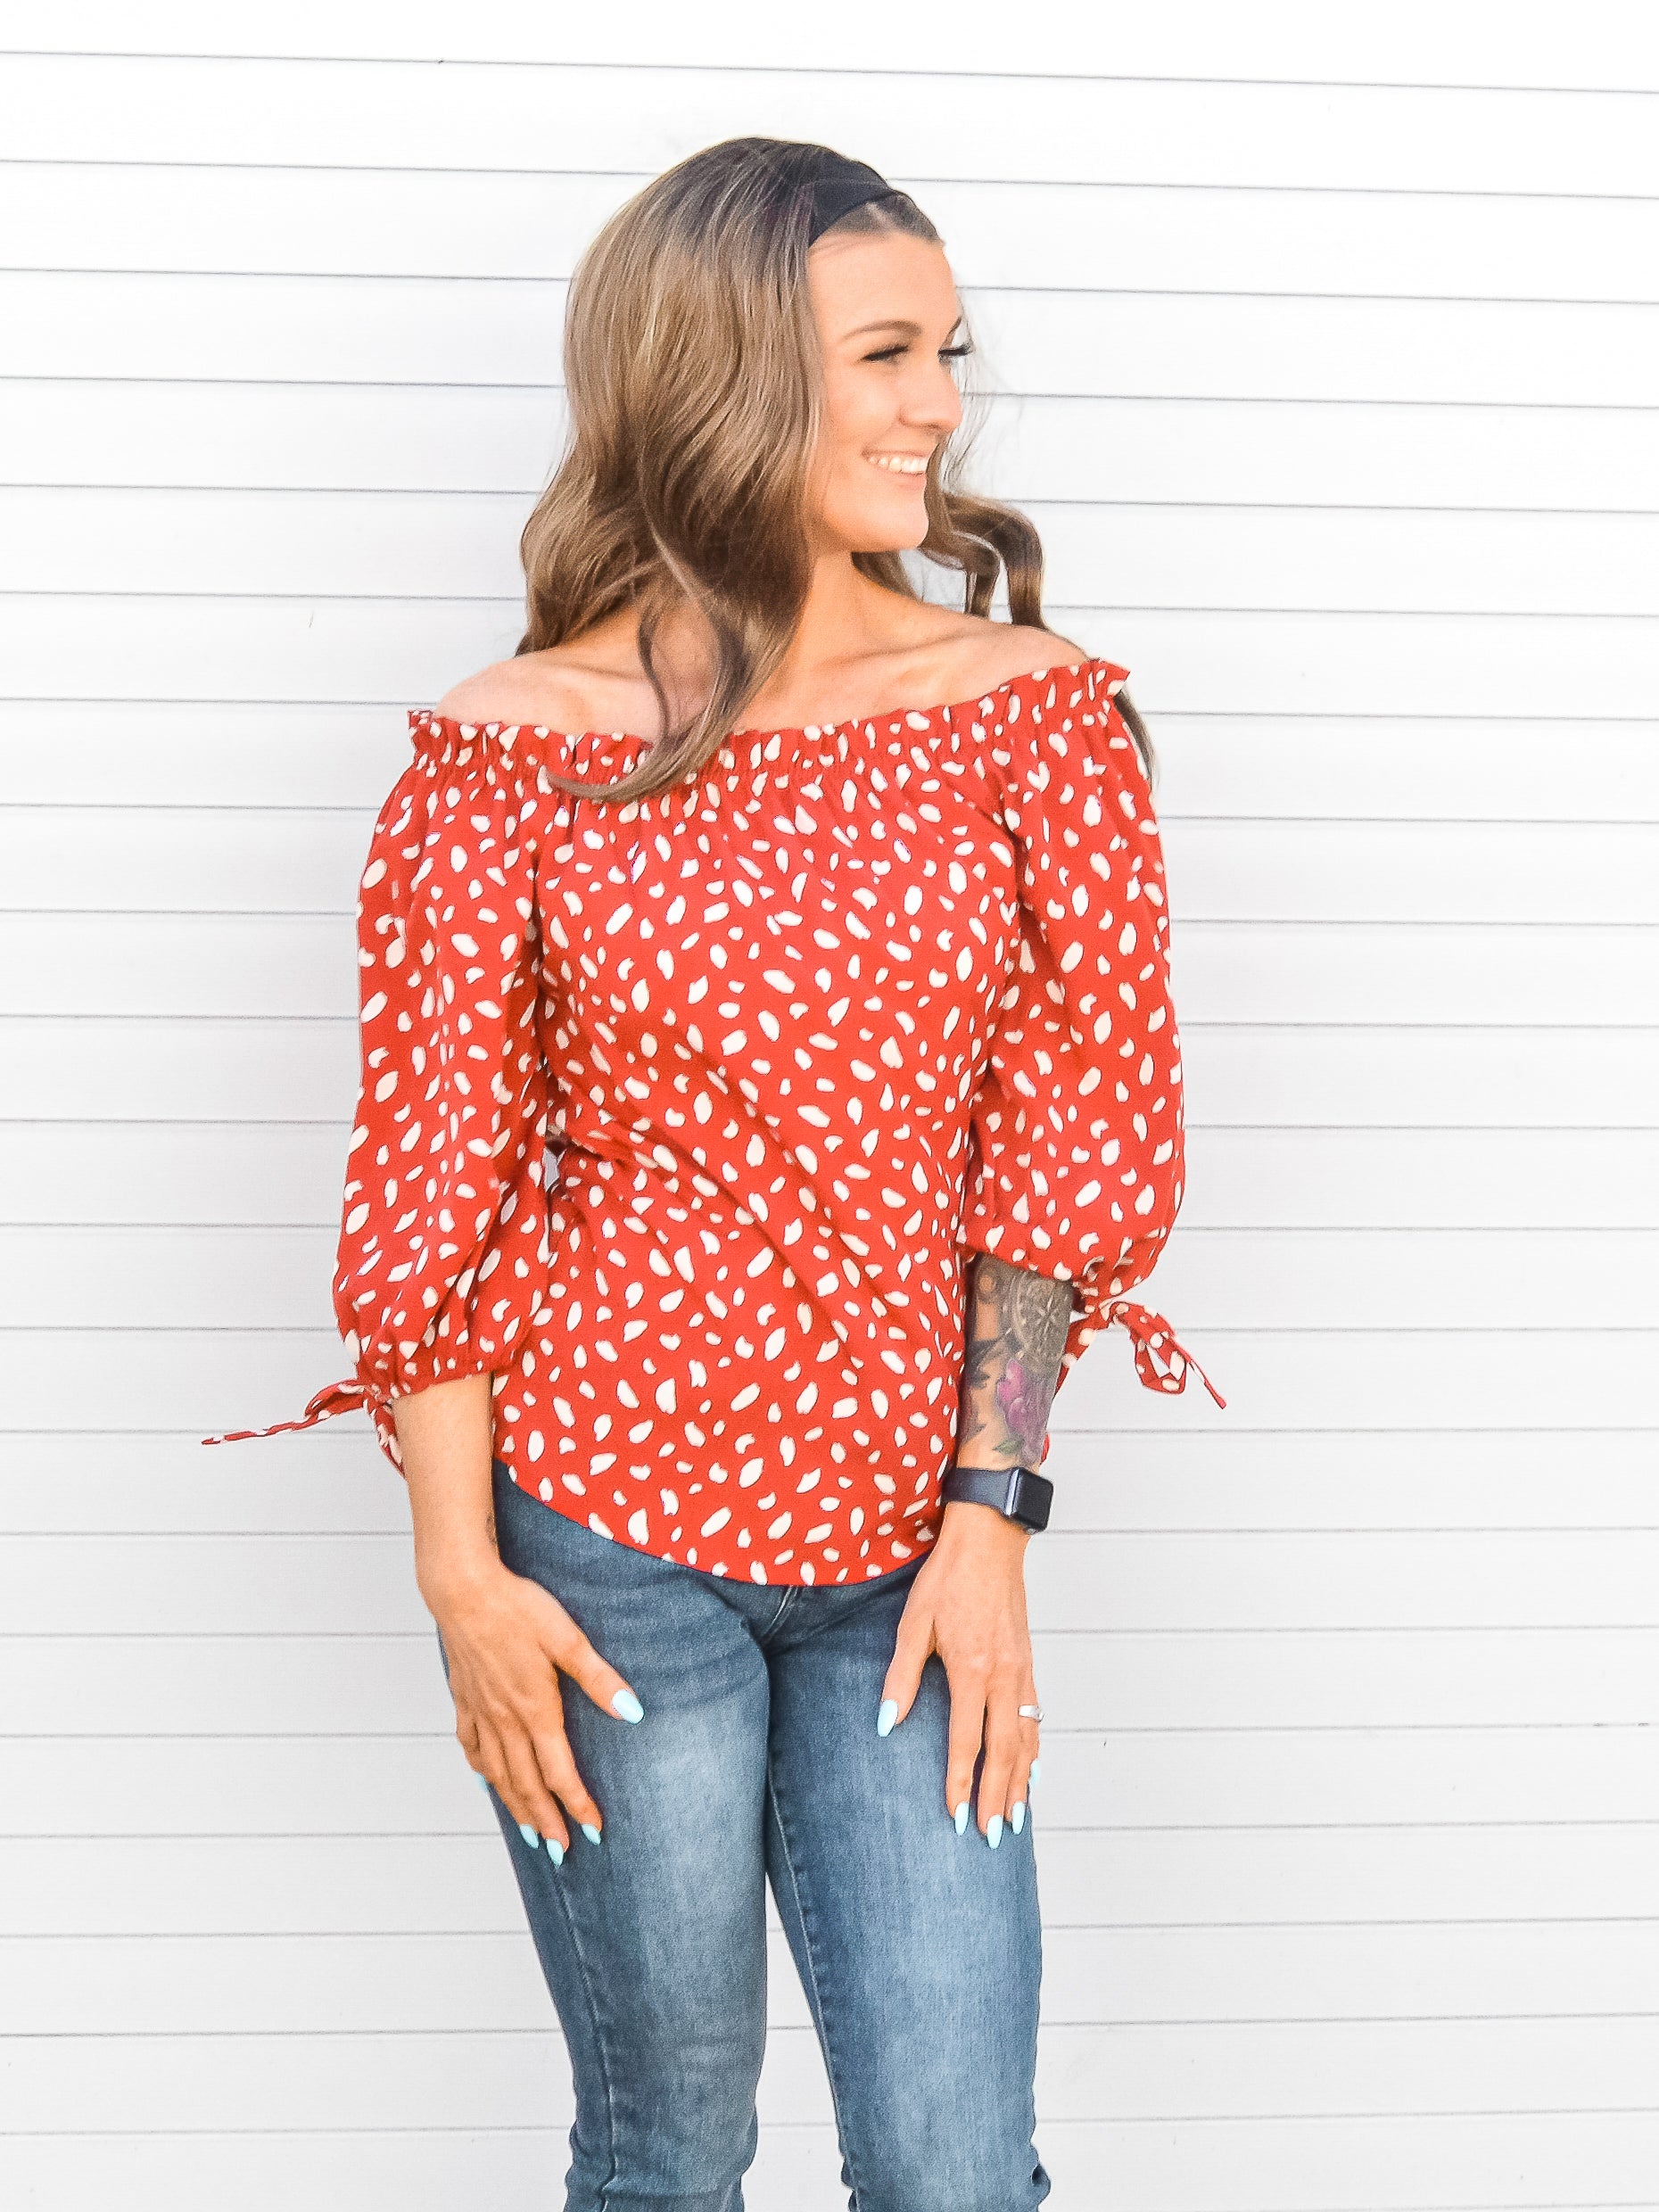 Red off the shoulder blouse with 3/4 sleeves and animal print patterned.